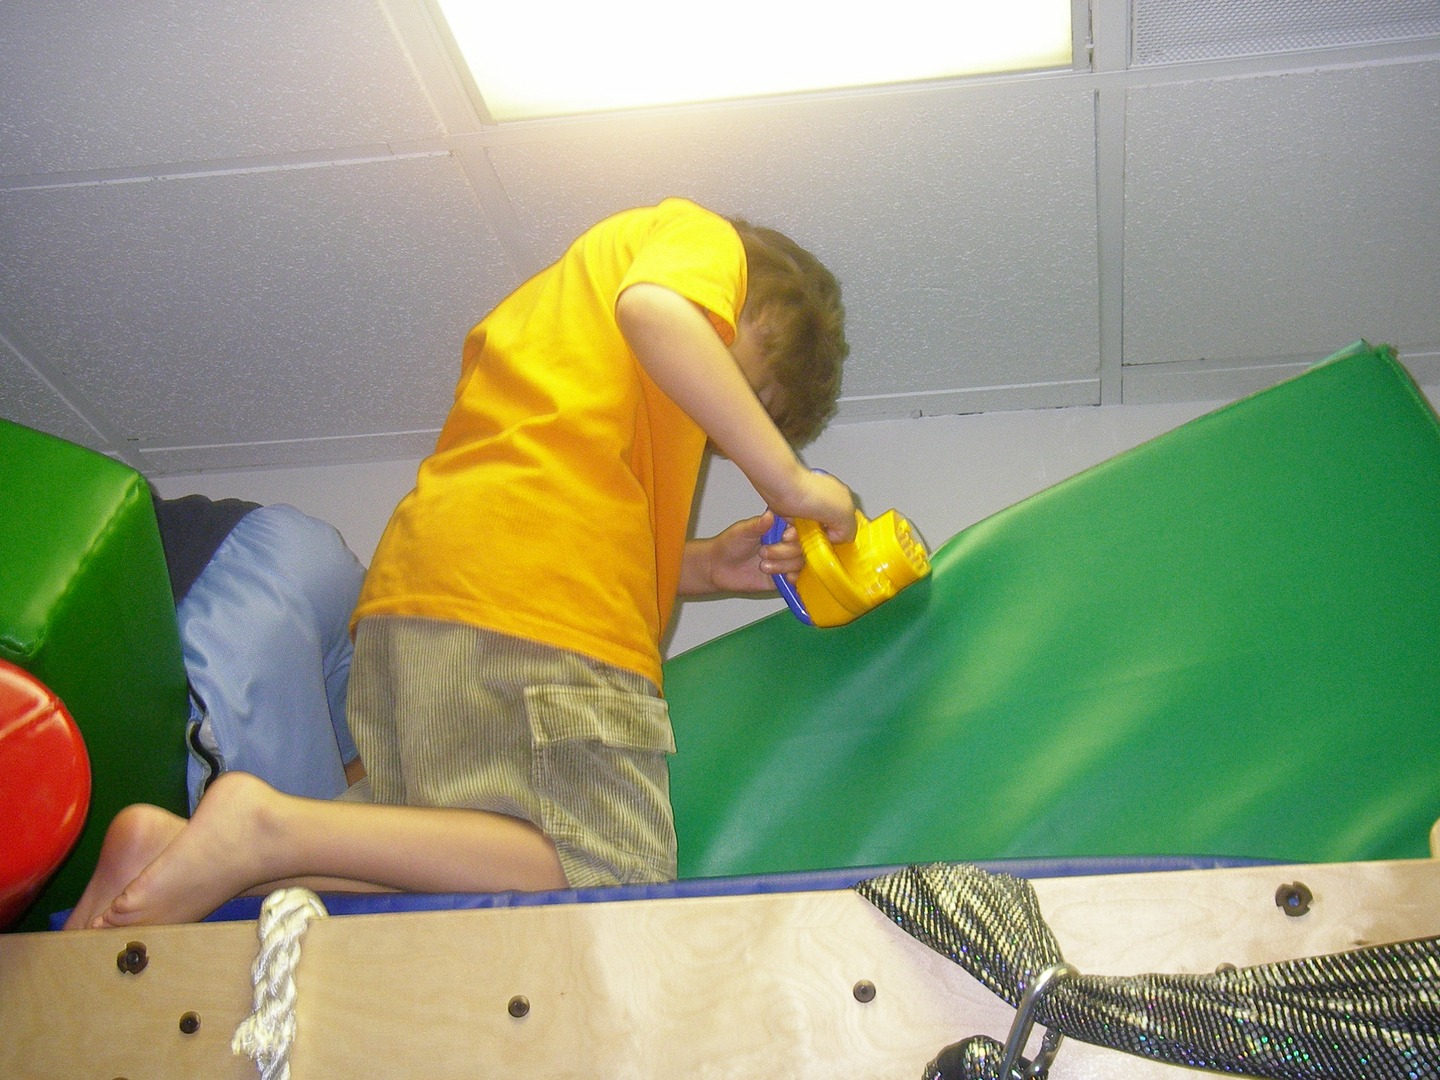 A boy is cleaning the wall on a climbing wall.